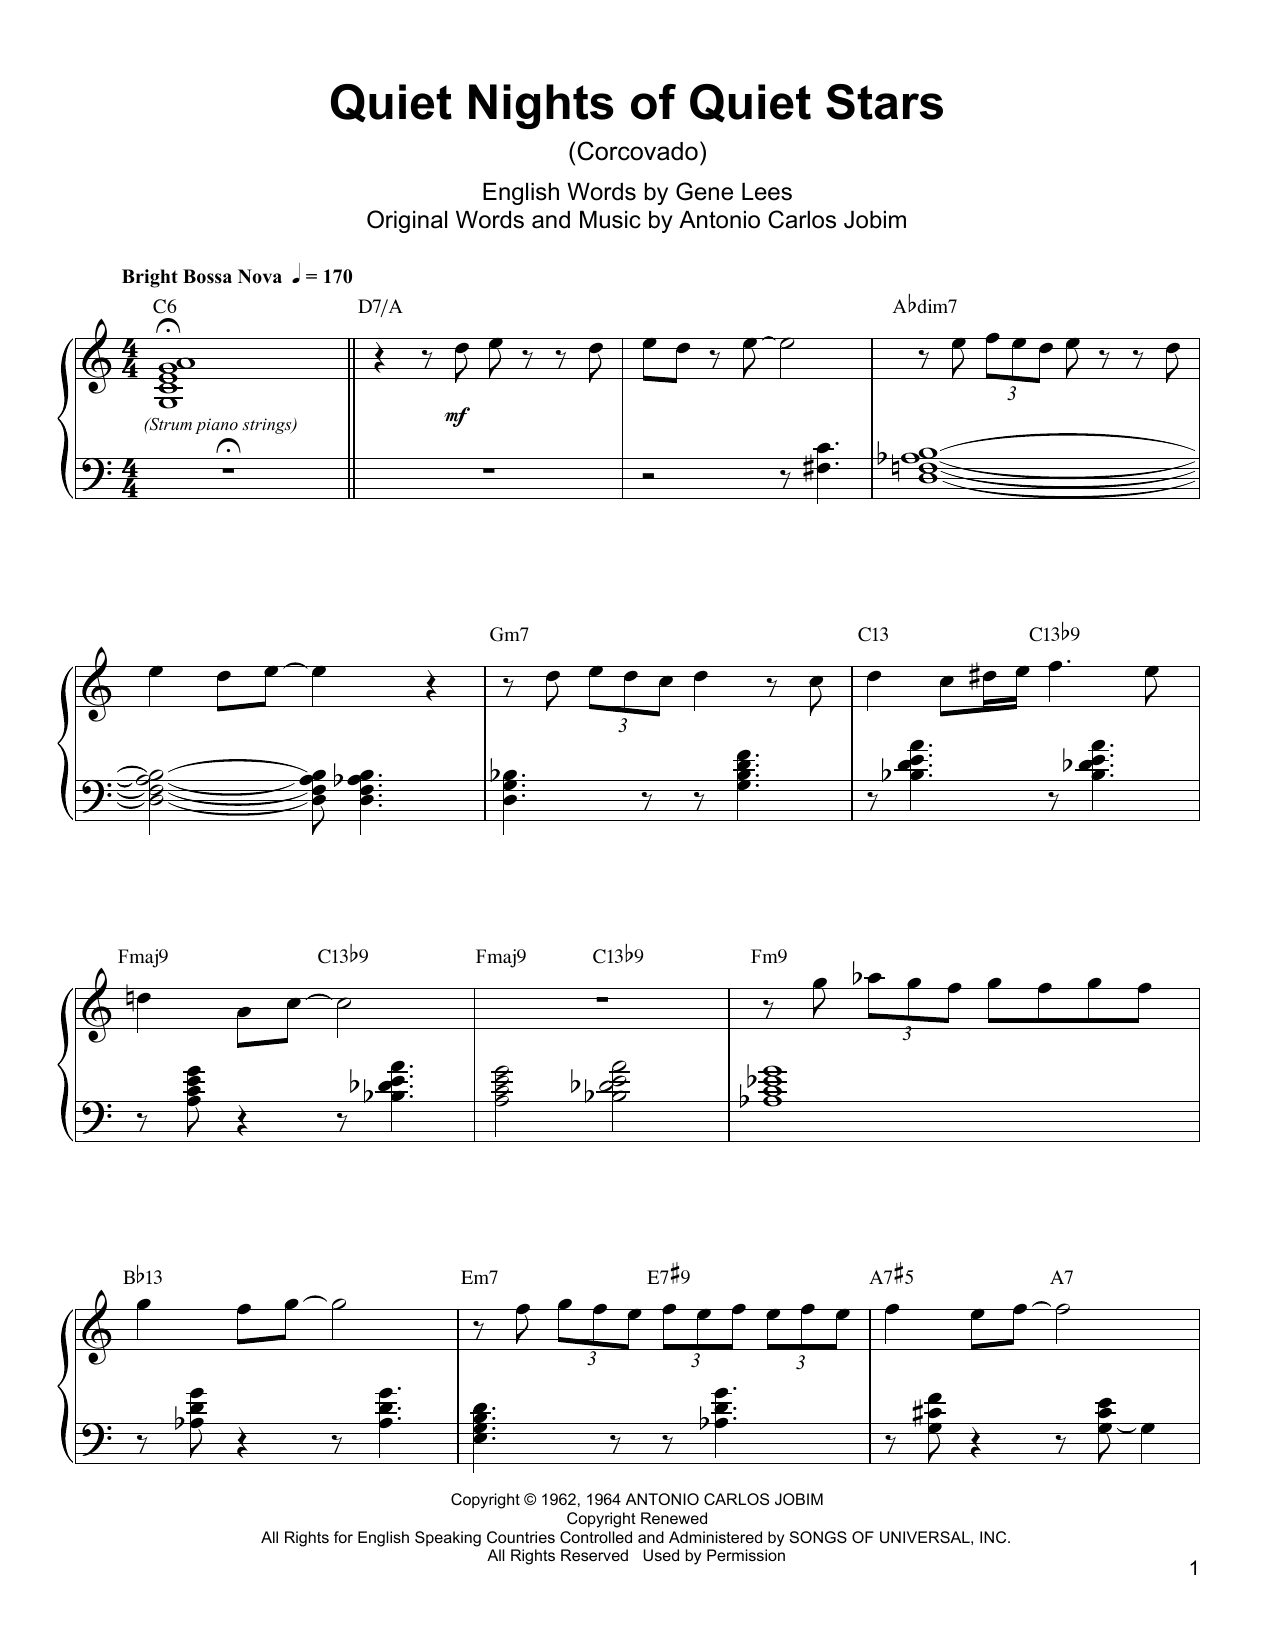 Download Oscar Peterson Quiet Nights Of Quiet Stars (Corcovado) Sheet Music